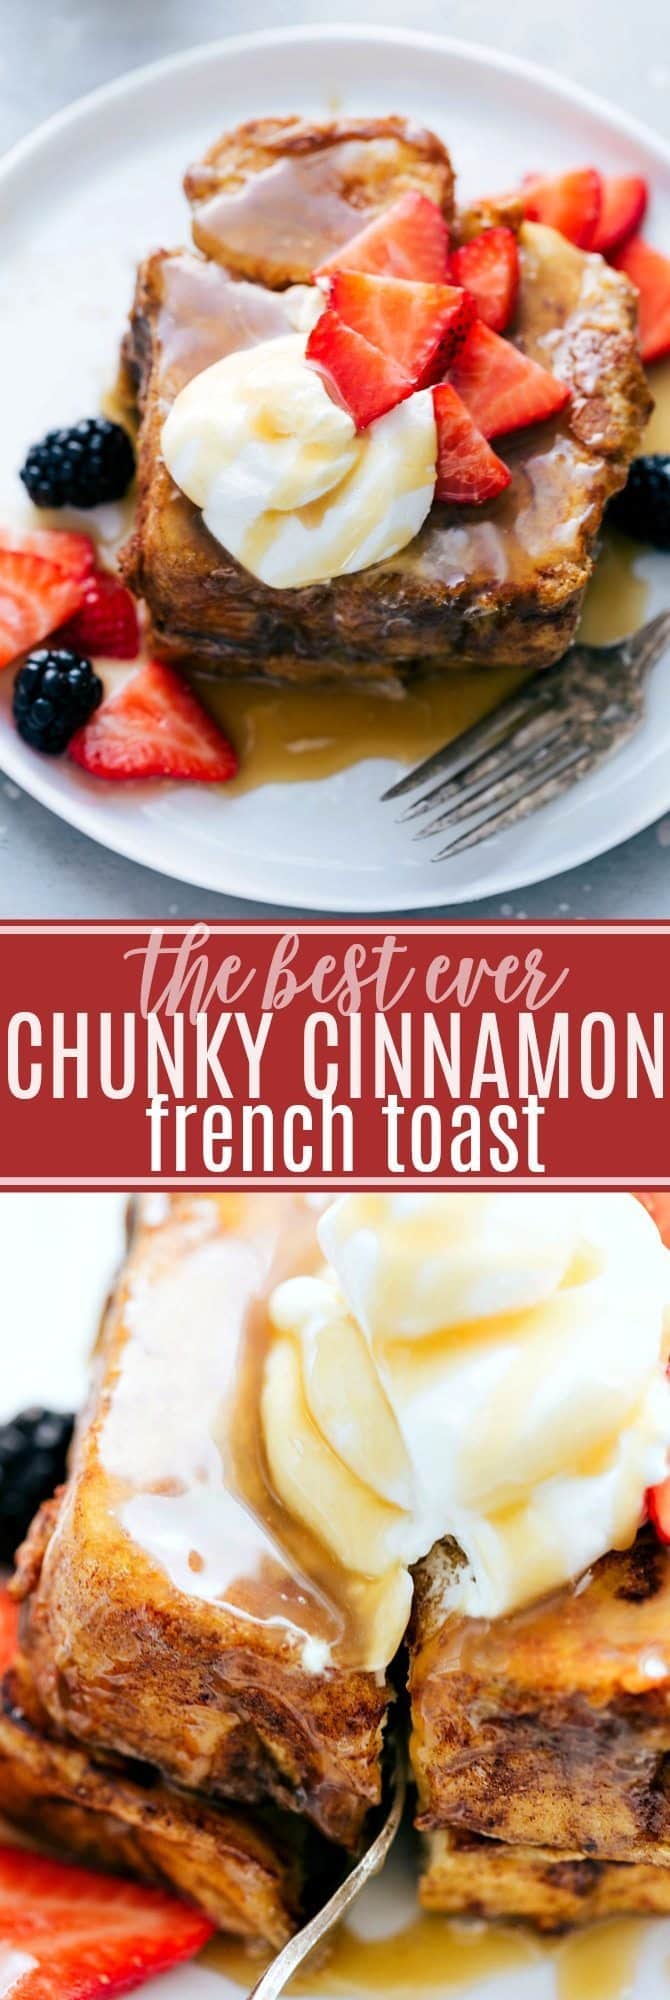 KNEADER'S FRENCH TOAST COPYCAT! The best cinnamon sugar French toast topped with whipped cream, fresh berries, and a 4-ingredient caramel syrup | chelseasmessyapron.com